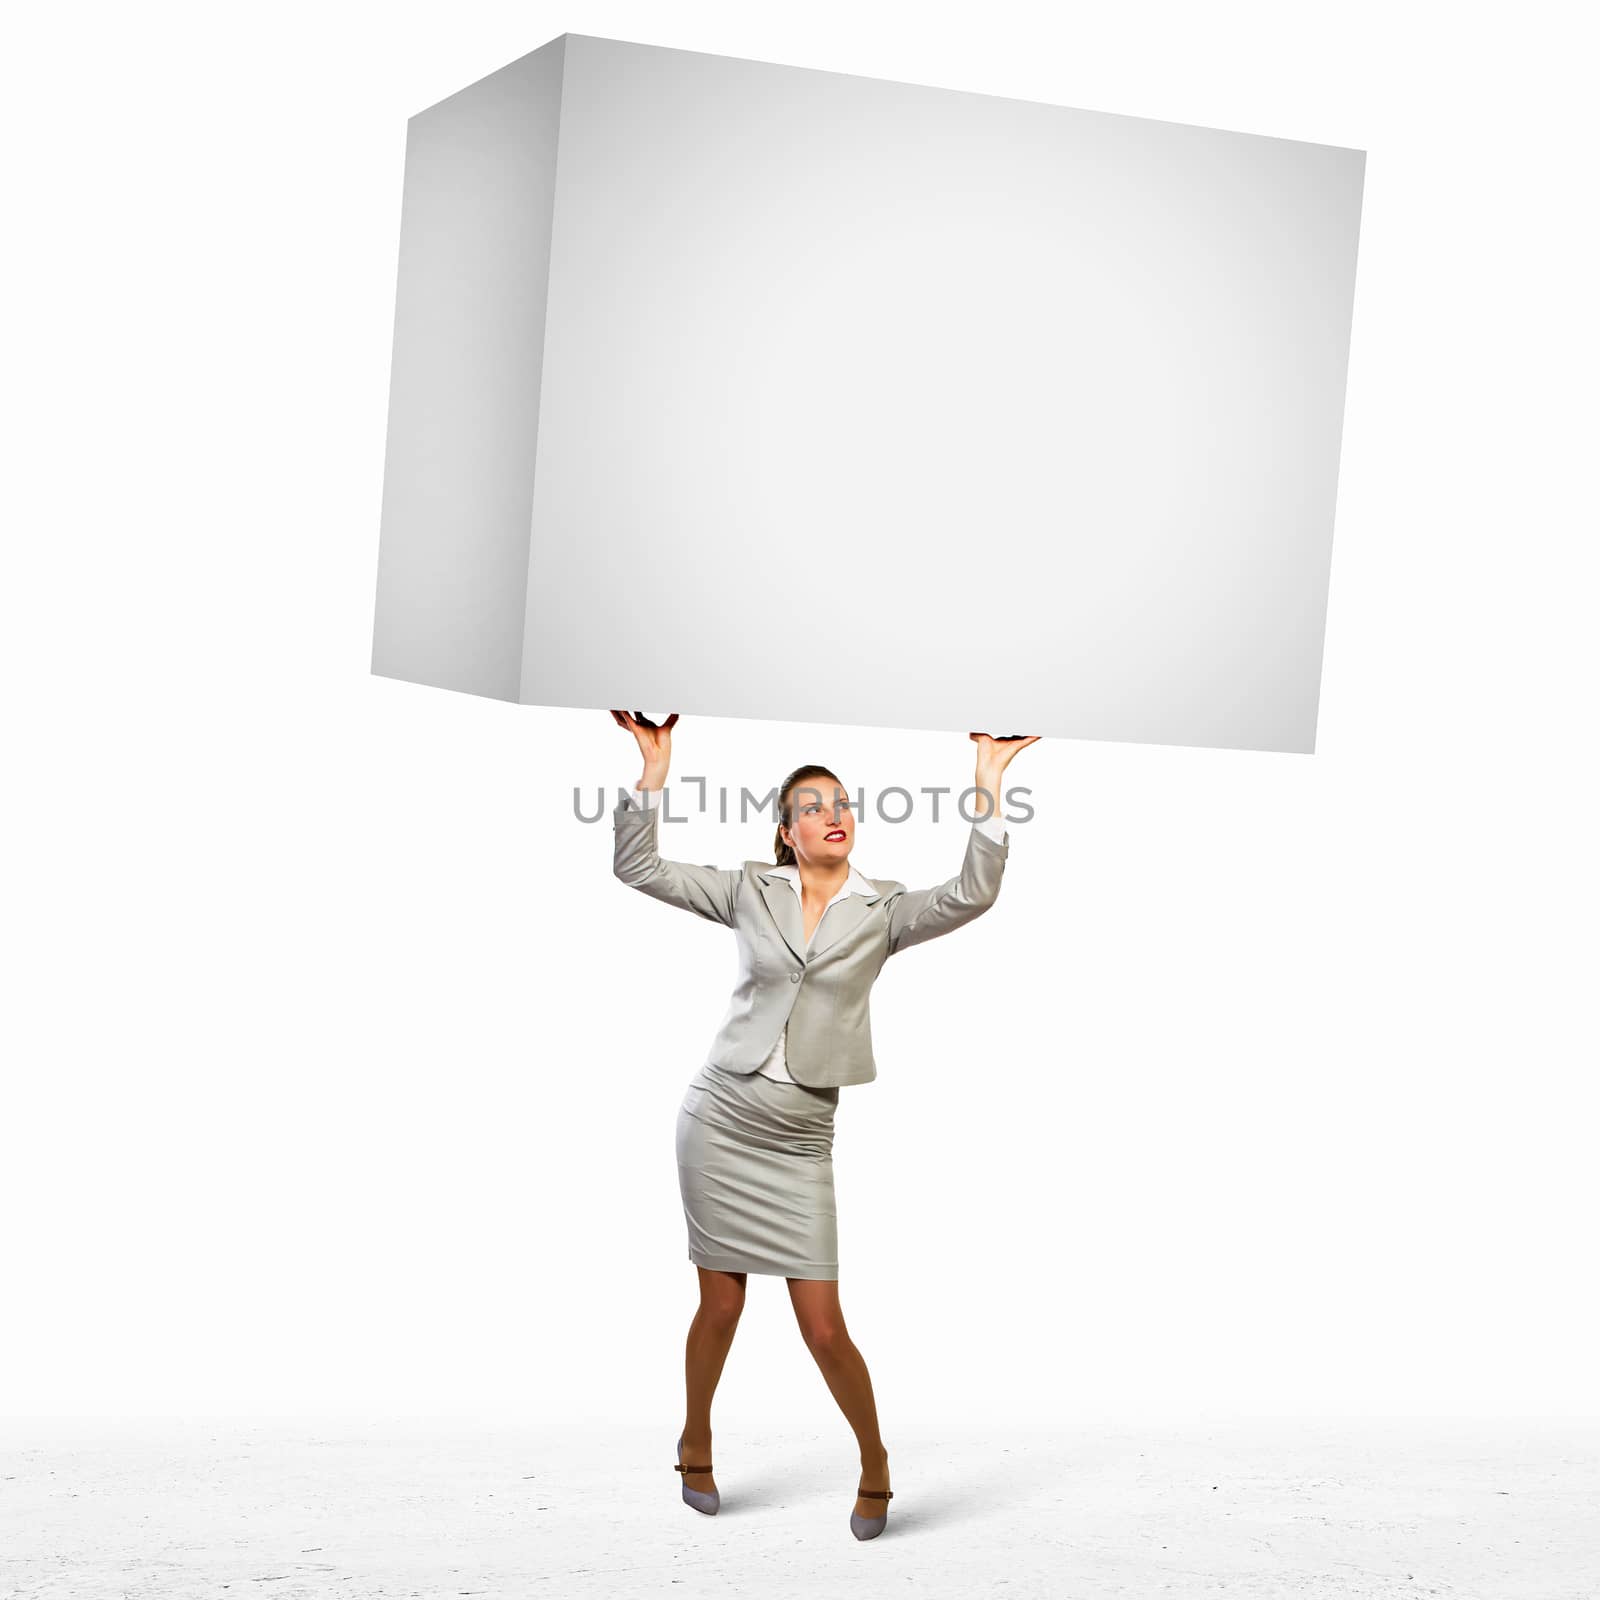 Image of business woman holding heavy white cube above head